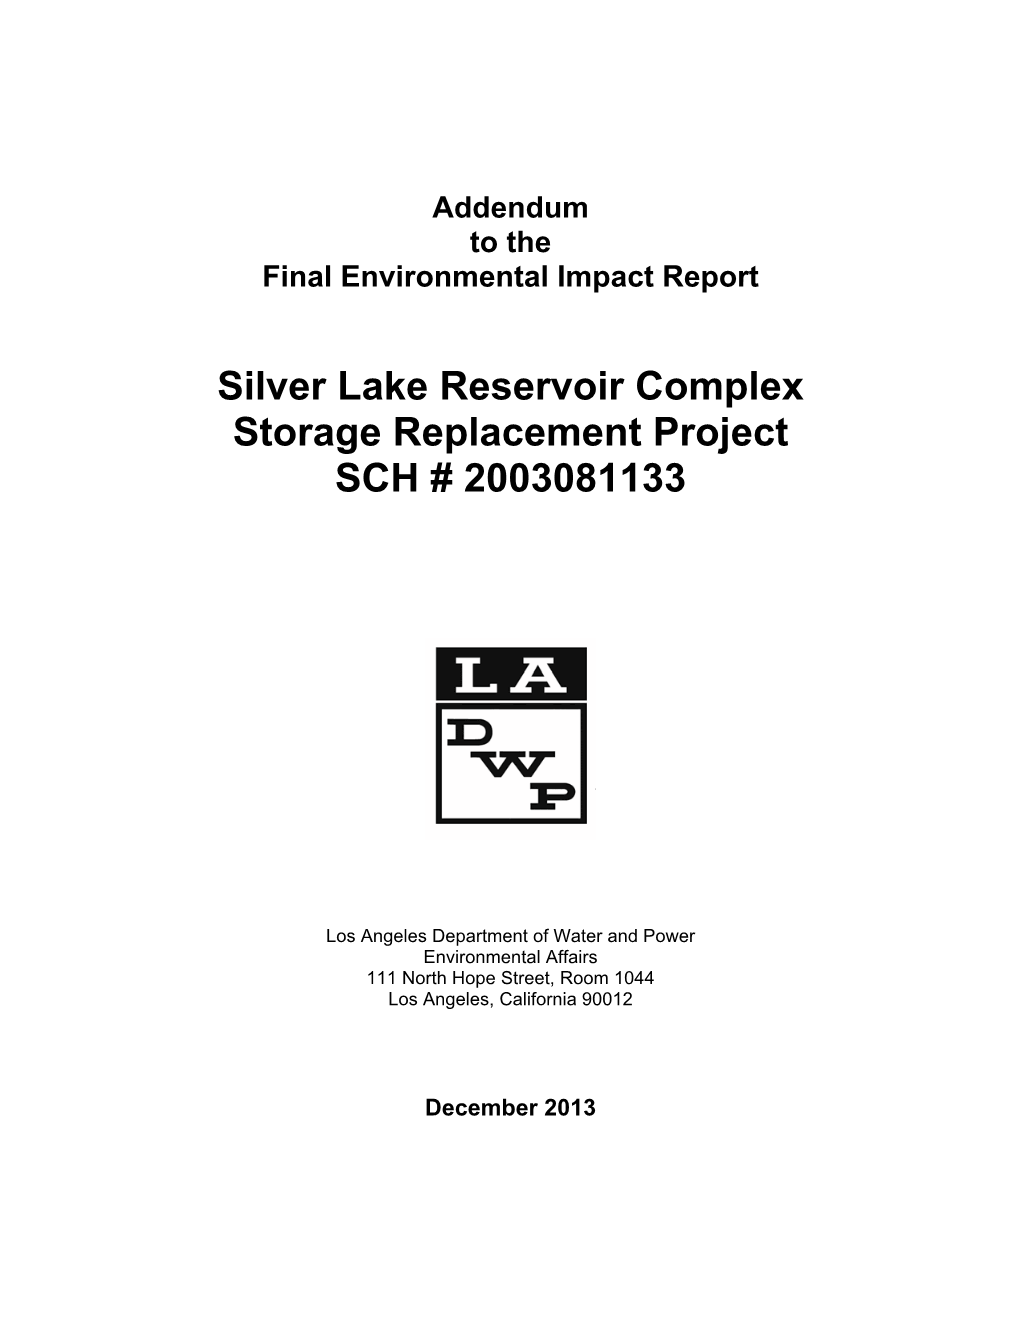 Silver Lake Reservoir Complex Storage Replacement Project SCH # 2003081133